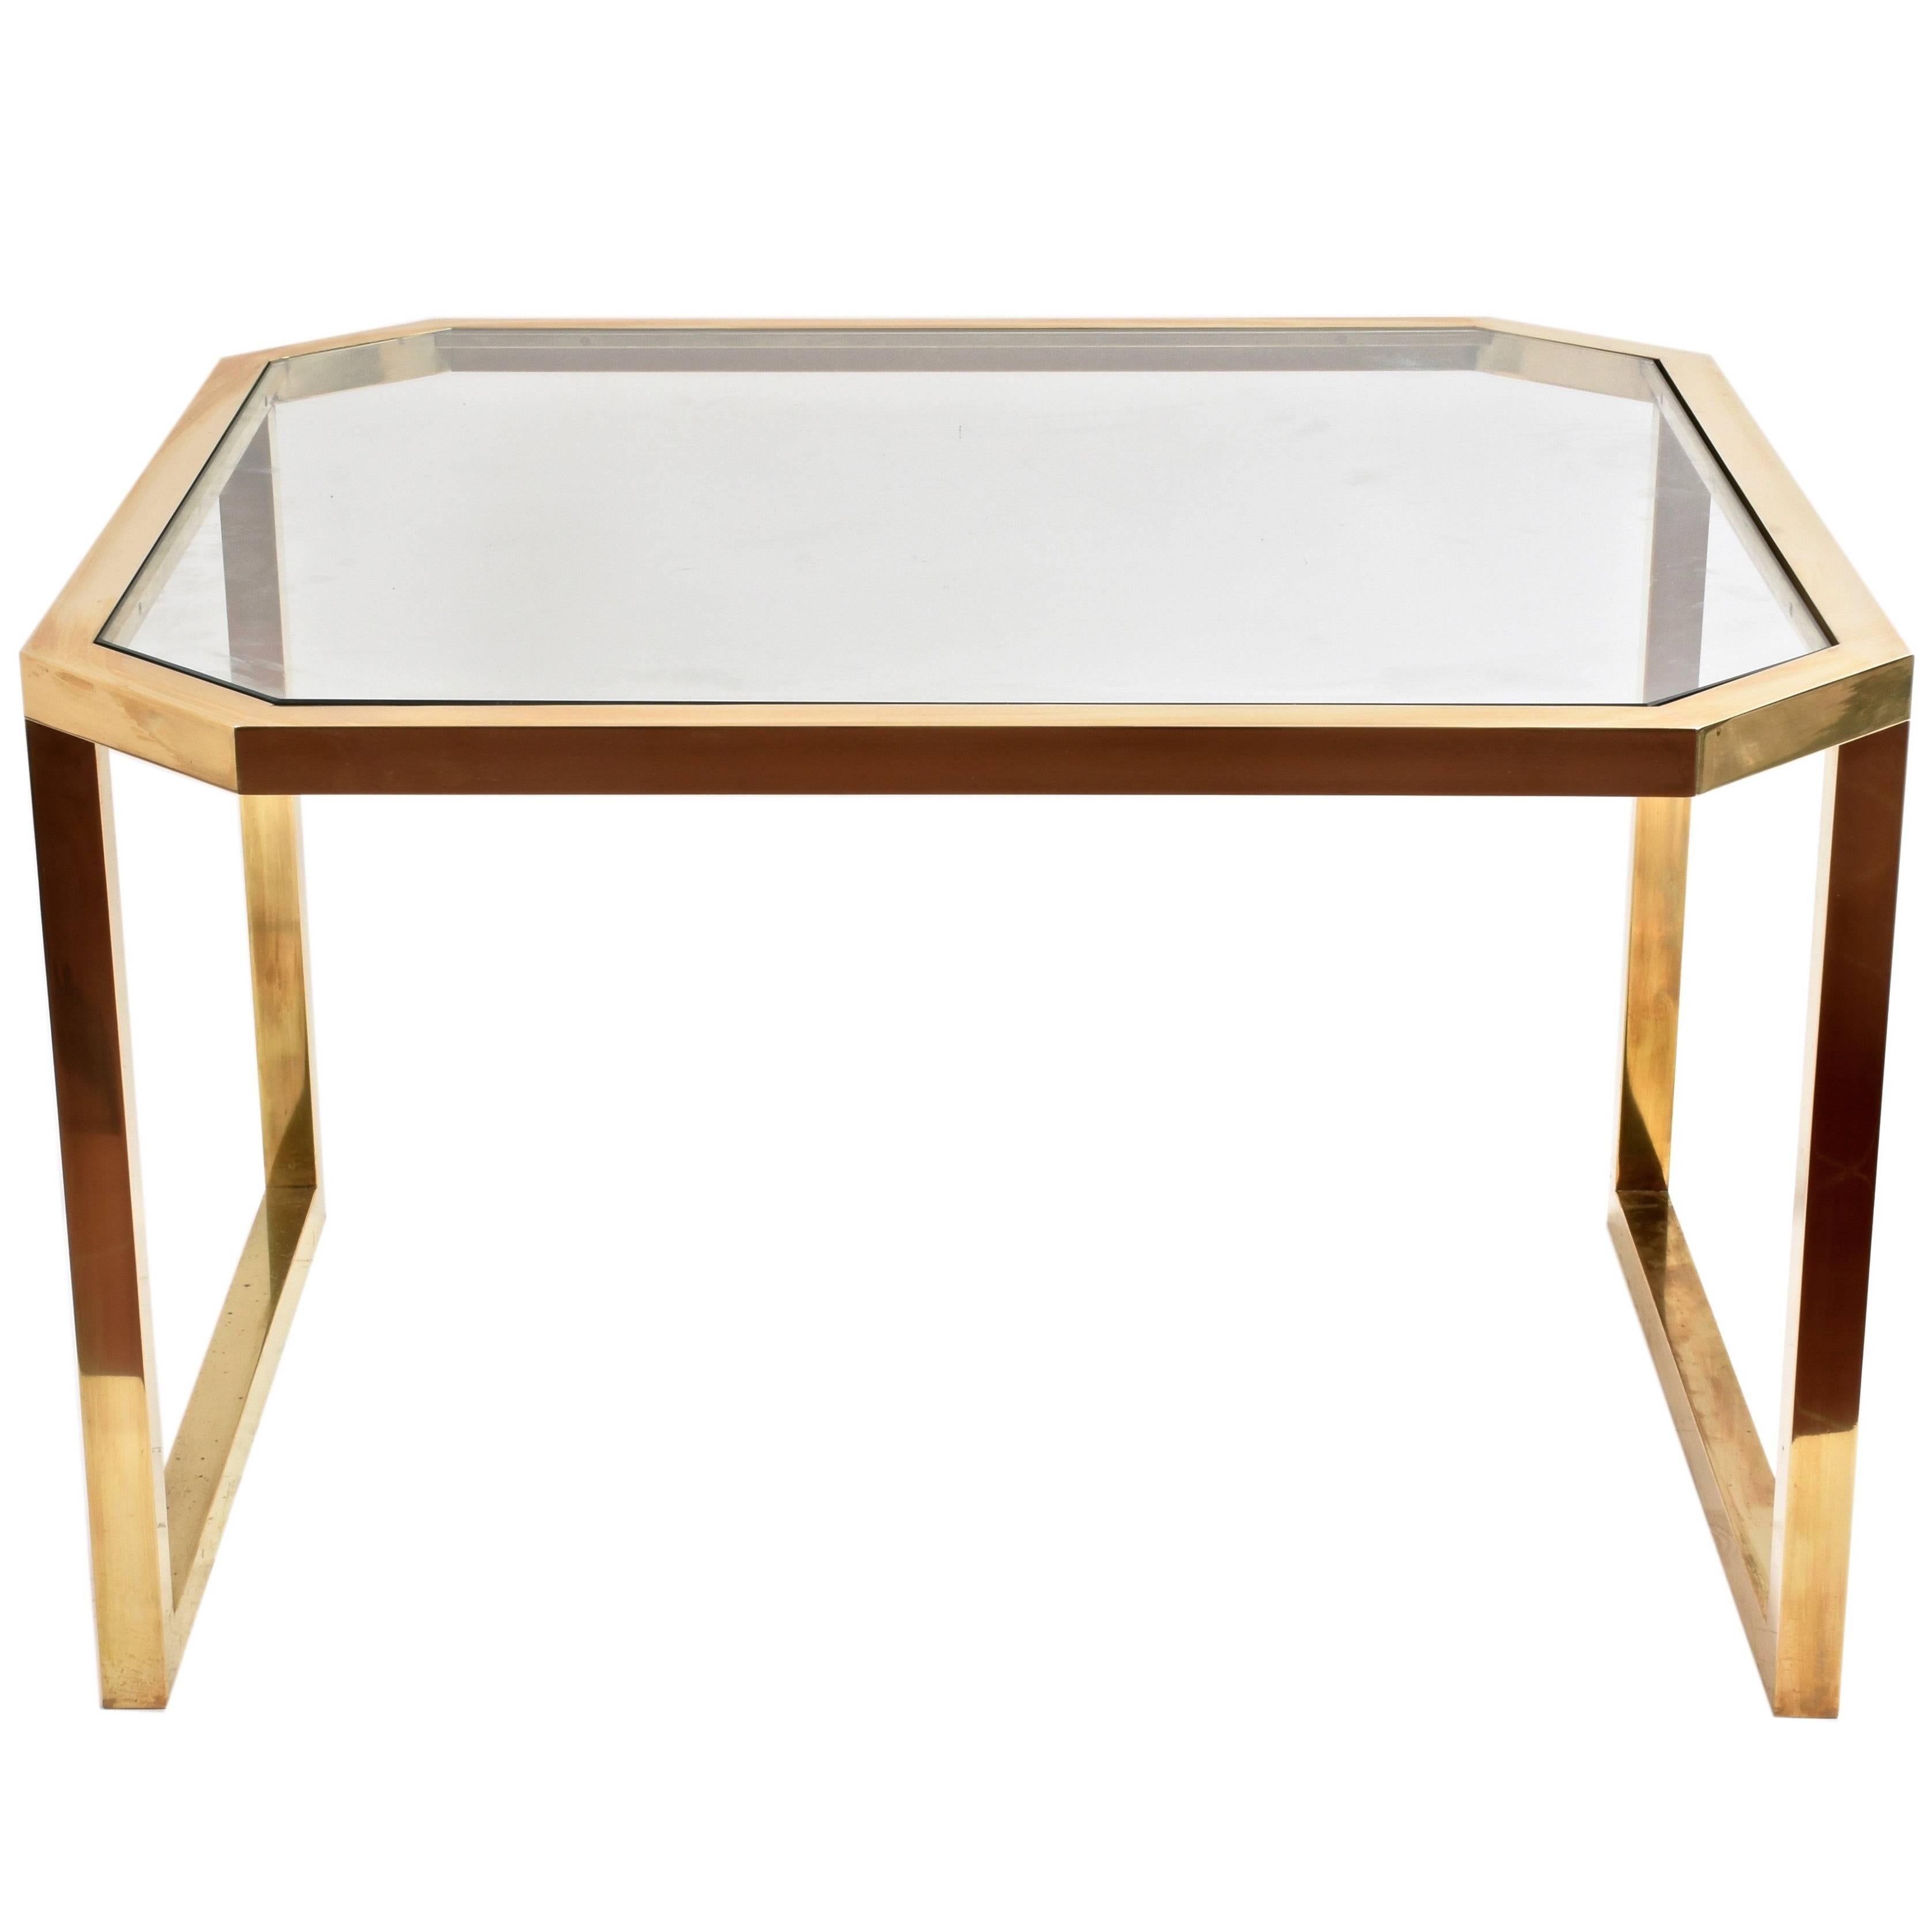 Octagonal Brass Table and Glass Top, Italy, 1970s, Mid-Century Modern